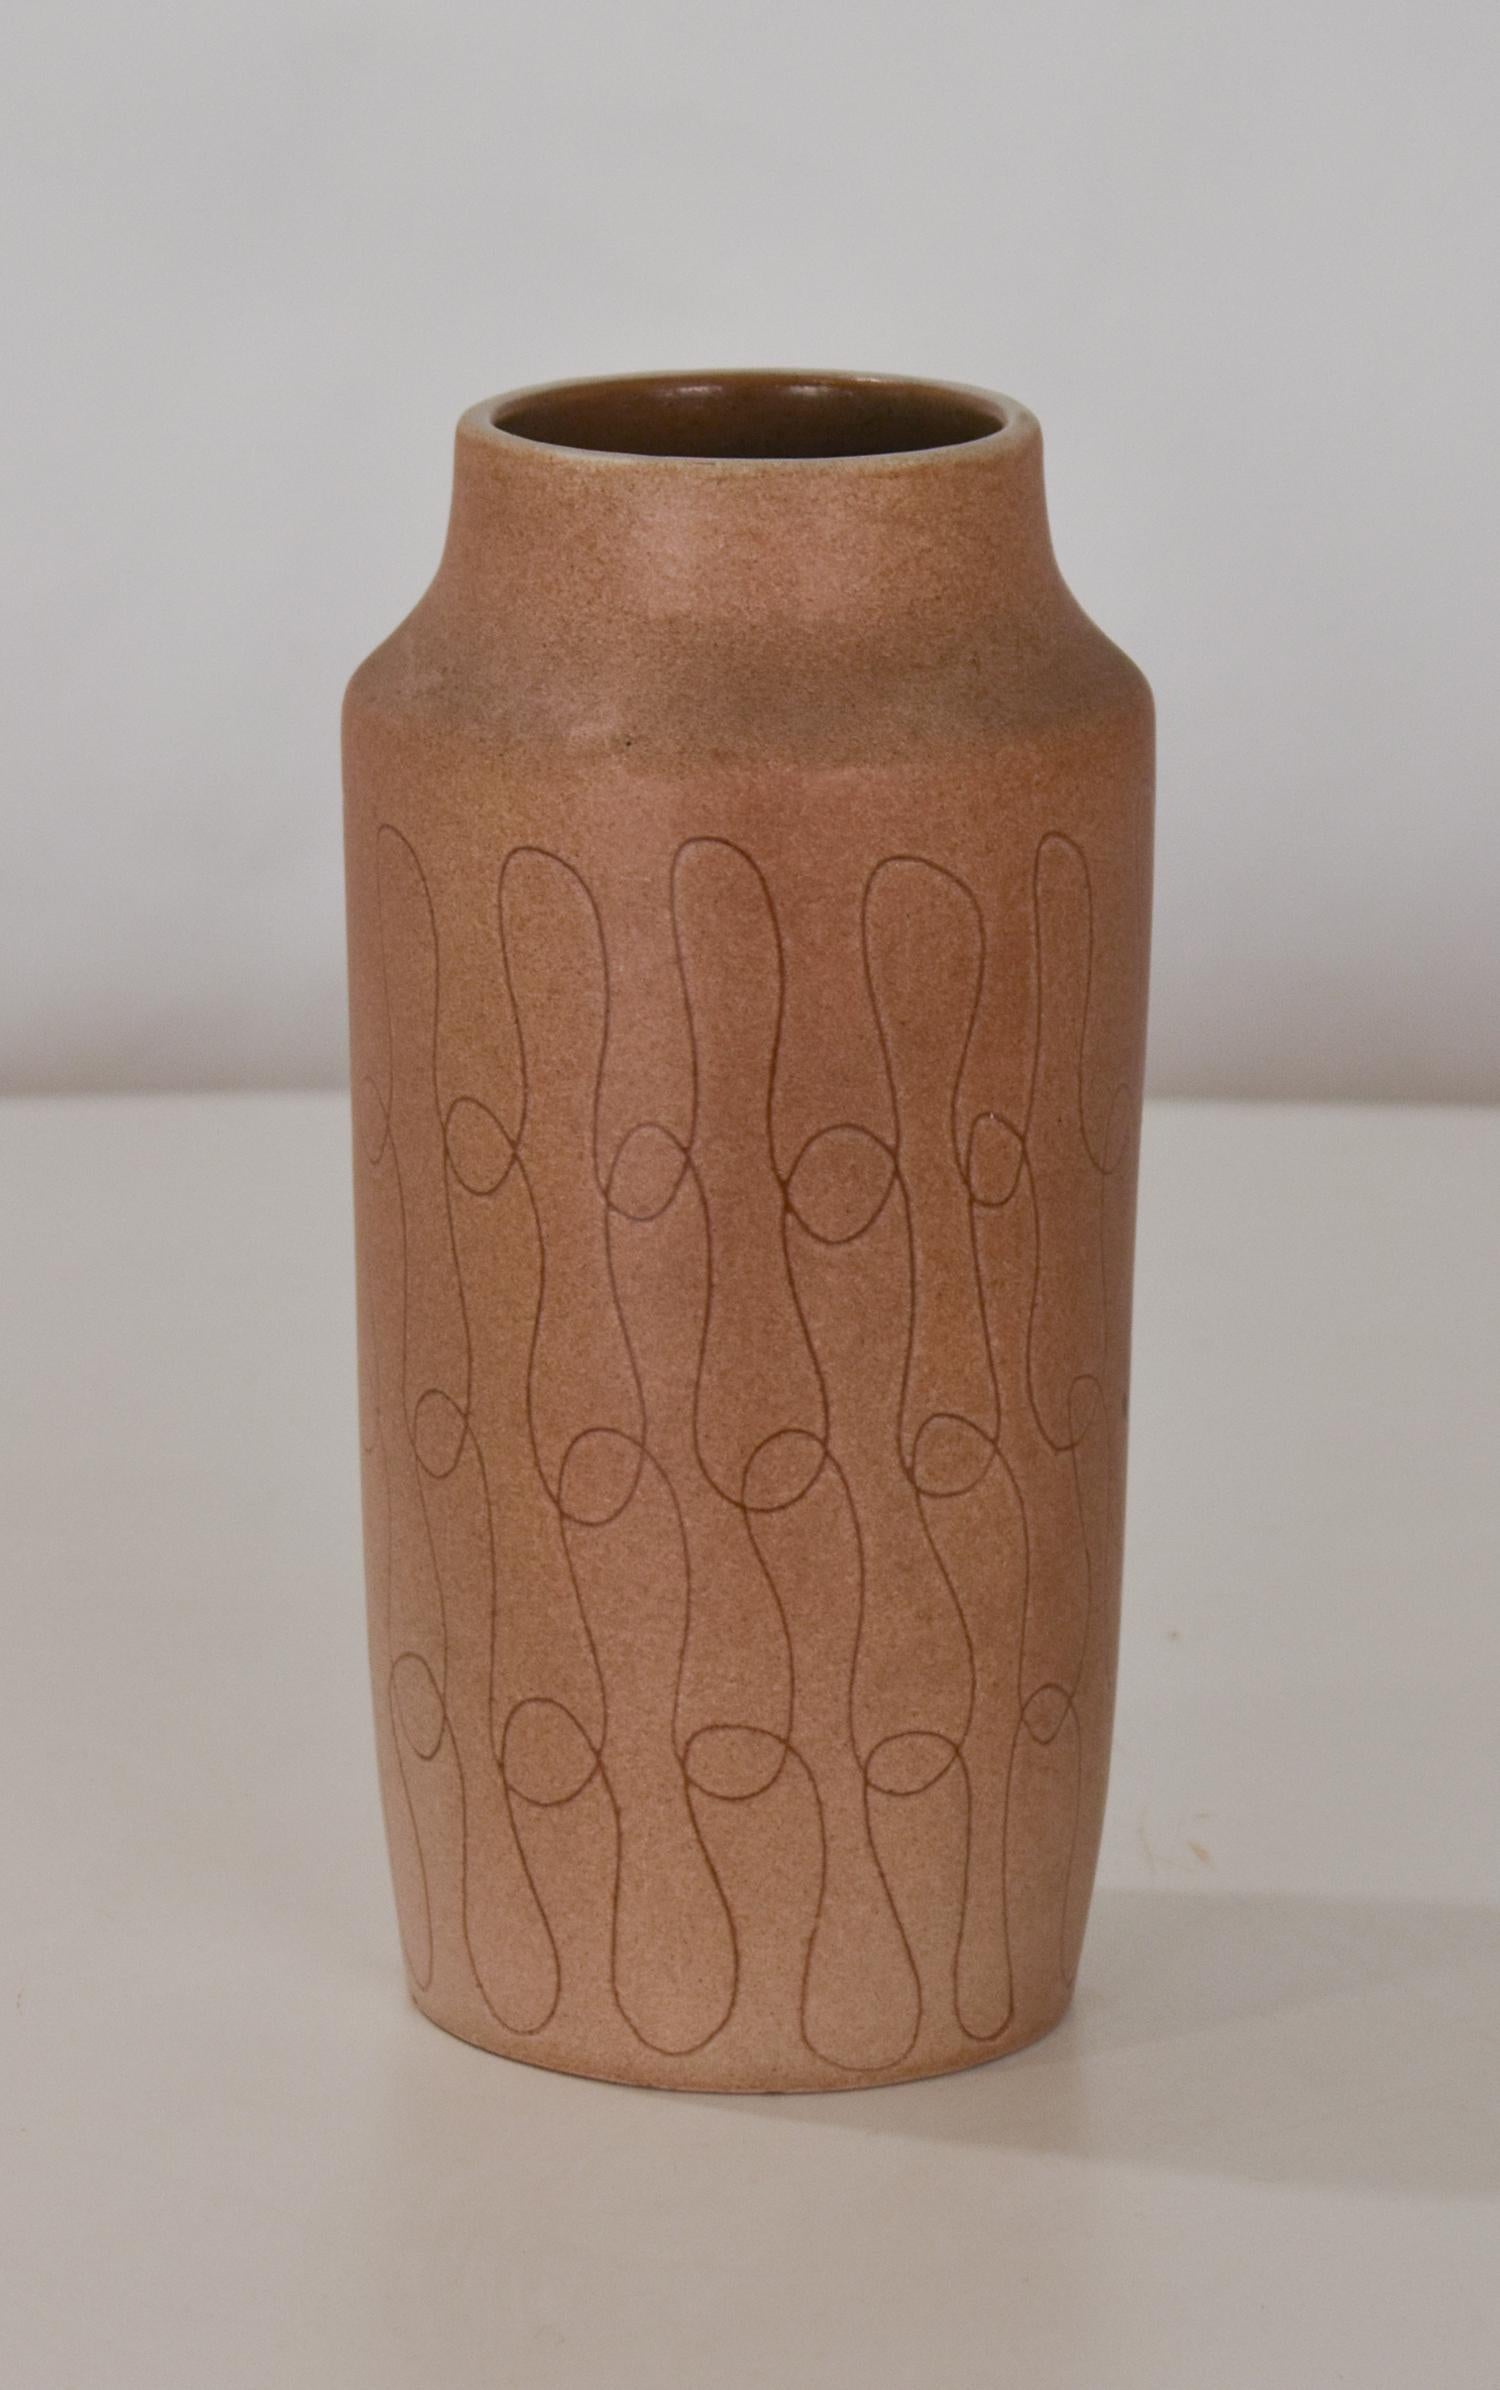 Ceramic vase in brown tones, by the ceramist Ferrando. Spain 1970's.
It is with its brand and has a geometric drawing.